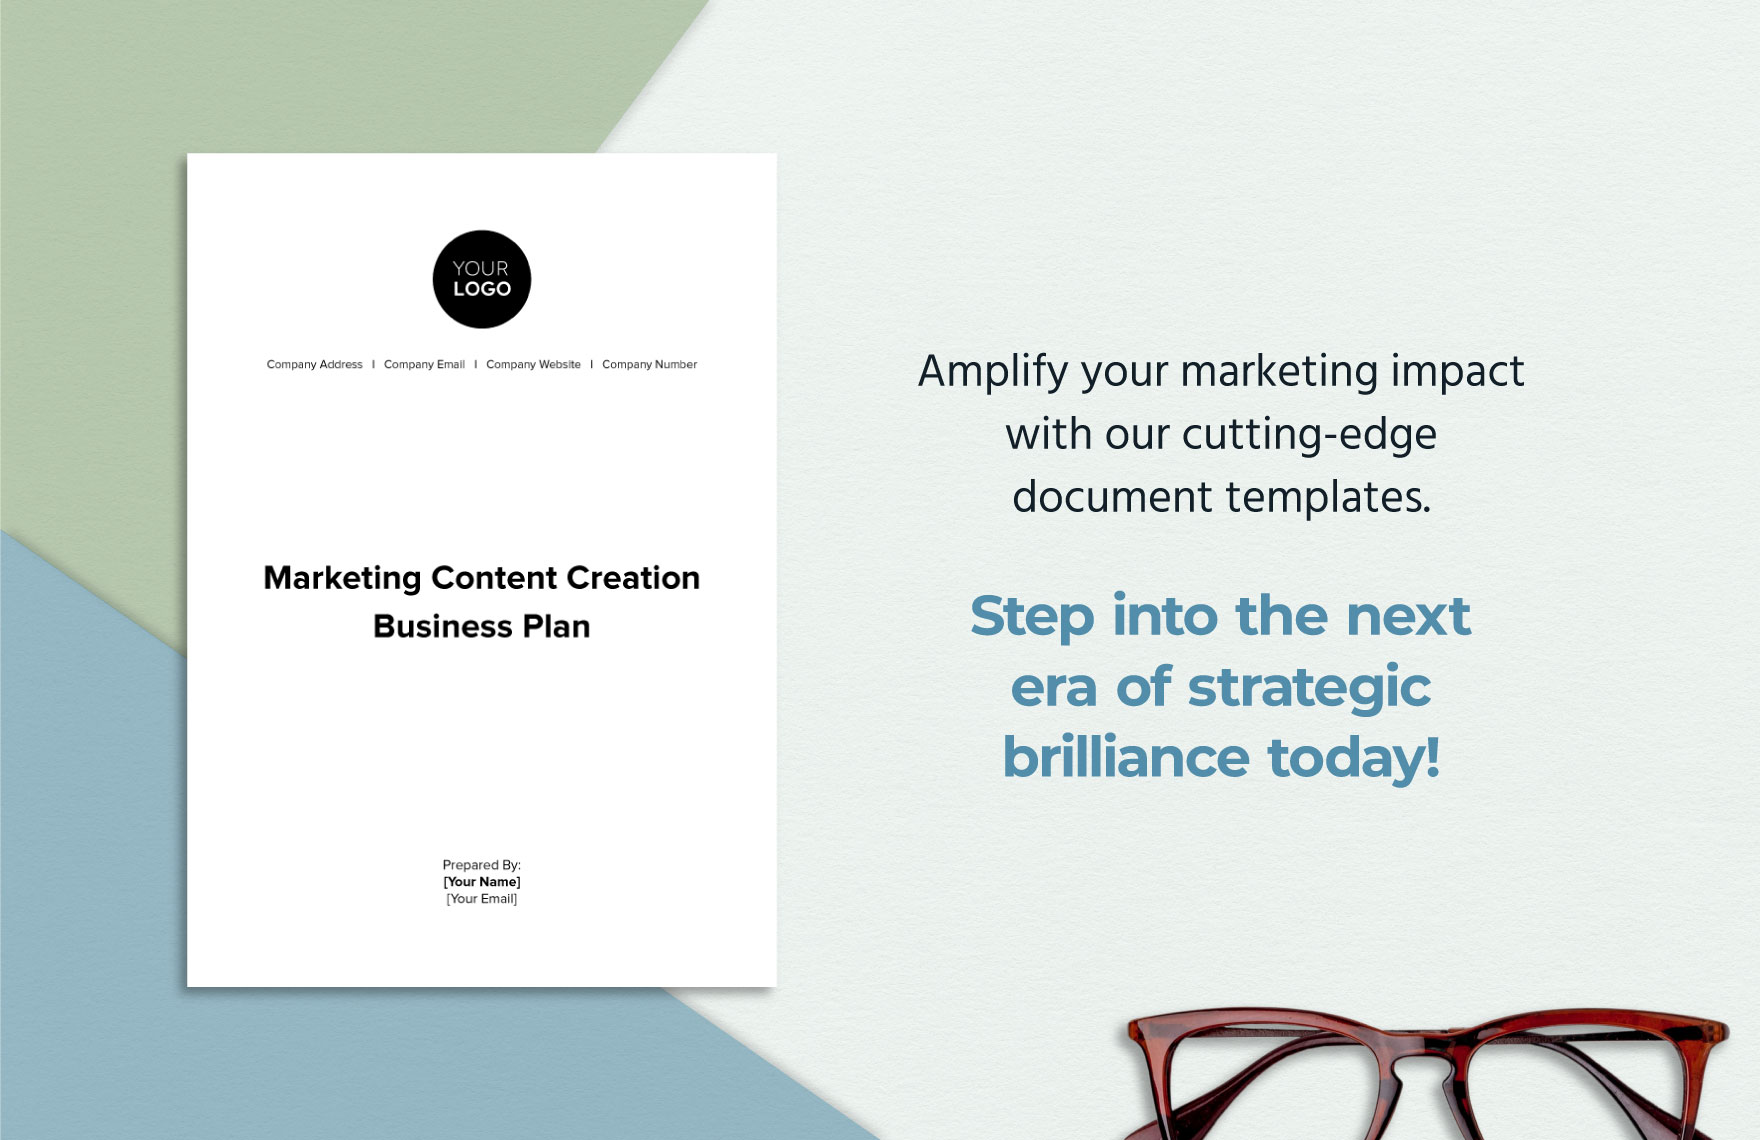 Marketing Content Creation Business Plan Template